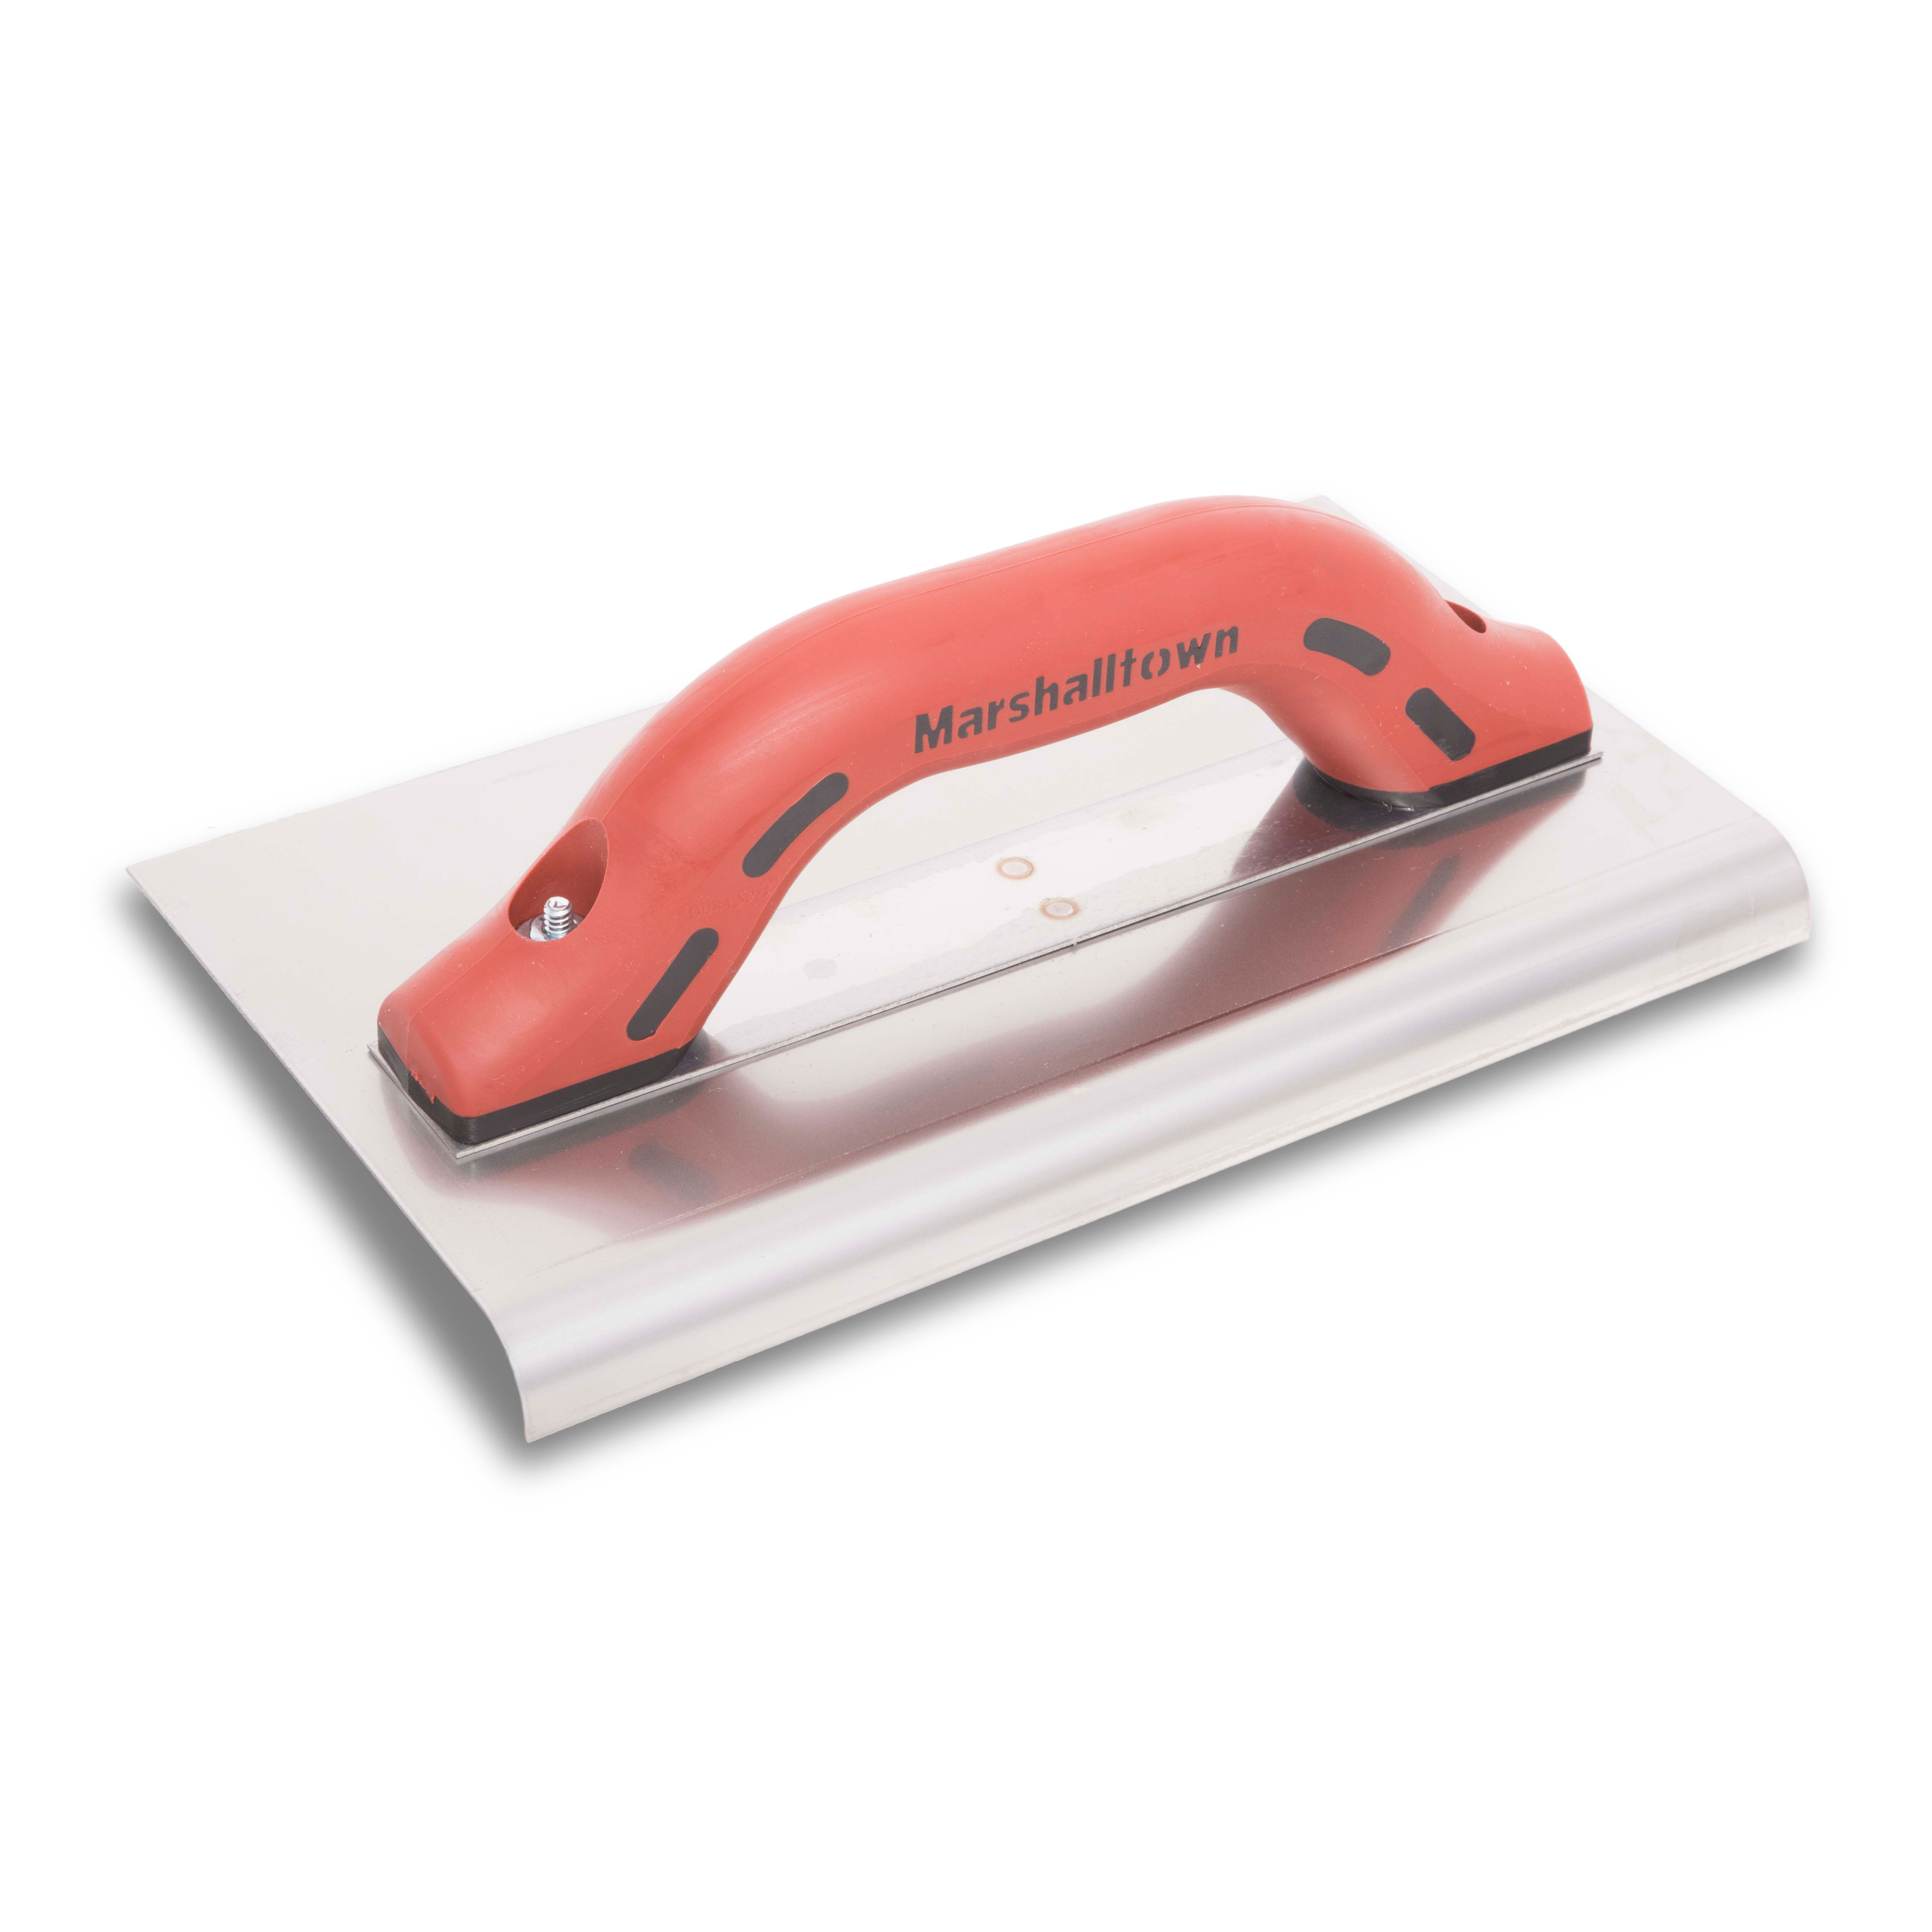 Marshalltown 132SSD 10in x 6in Big I Edgers Stainless Steel Edger-1/2R, 5/8L DuraSoft Handle 132SSD